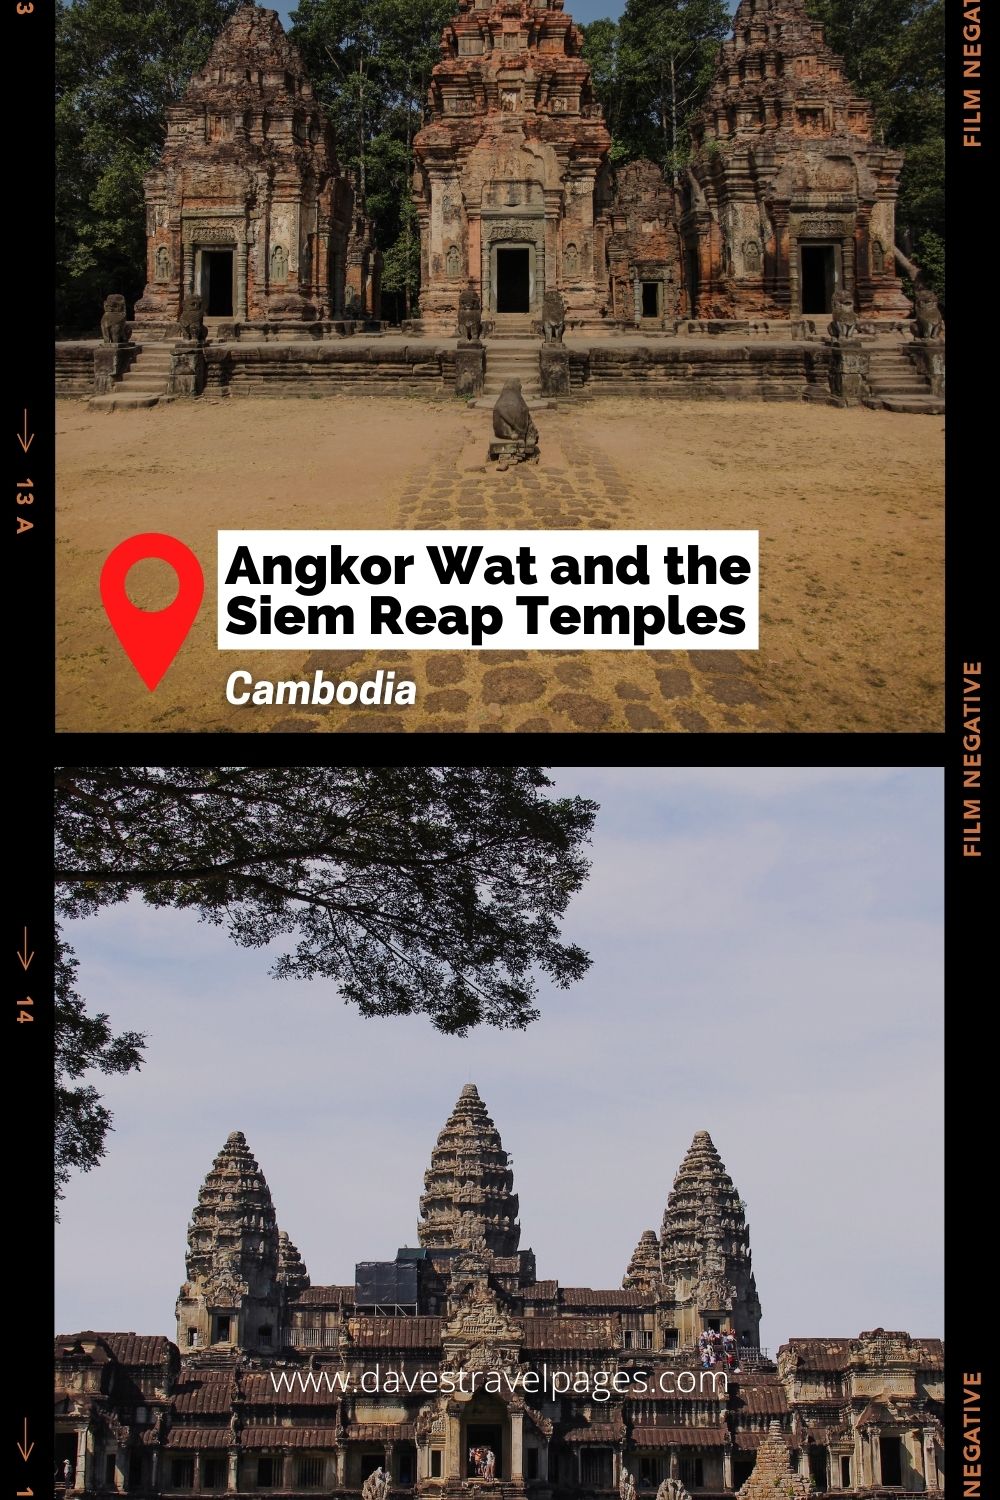 The Angkor Wat Temples are famous landmarks in Asia